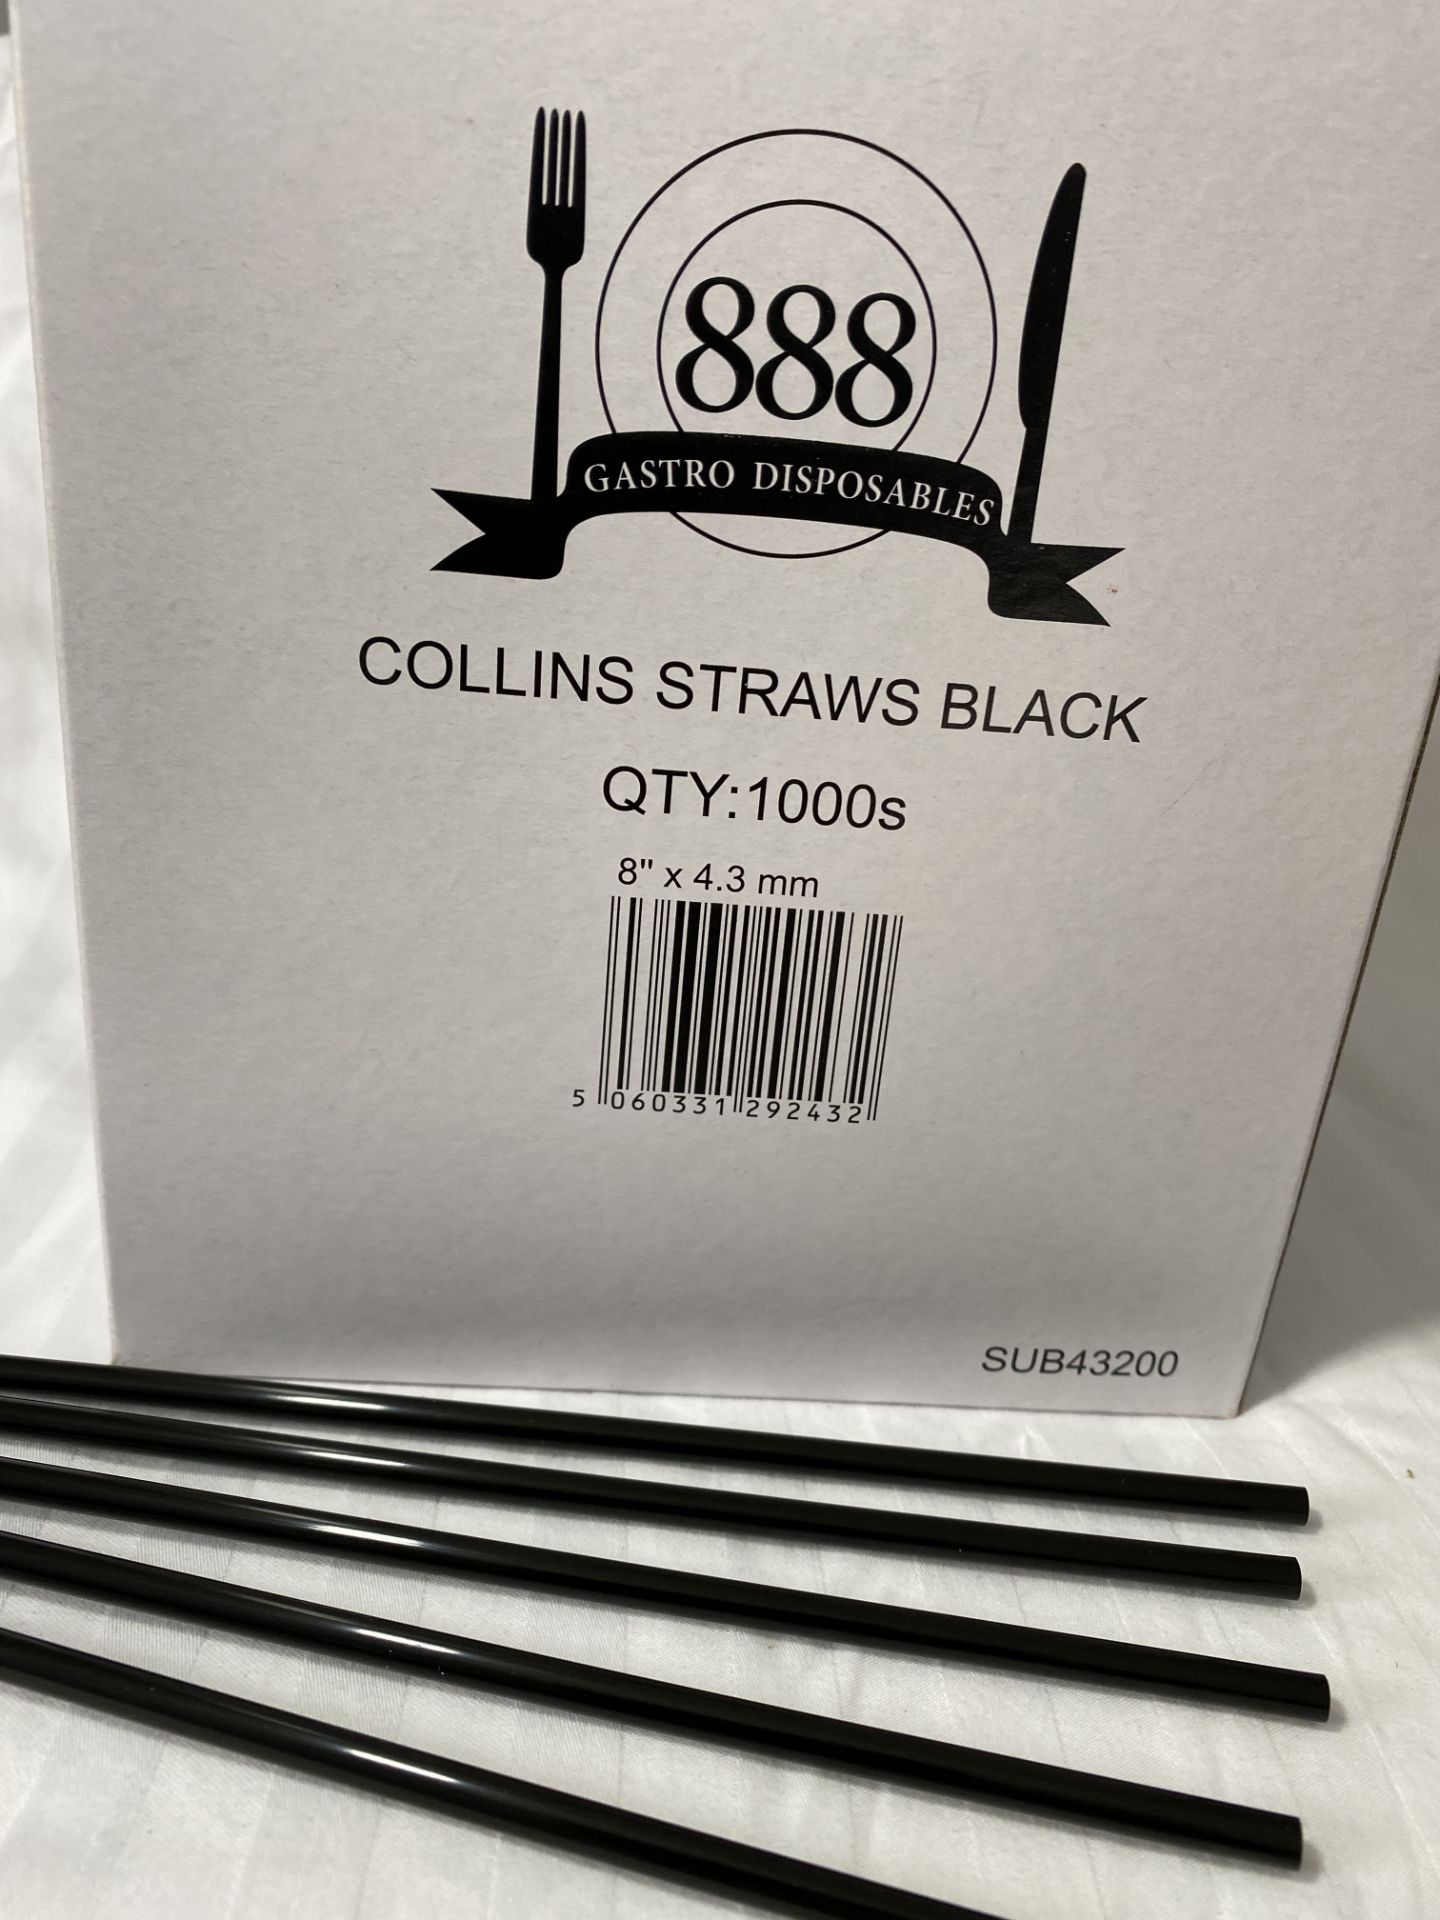 2 x Boxes of Collins Straws by 888 Gastro Disposables | DSP41 - Image 3 of 3